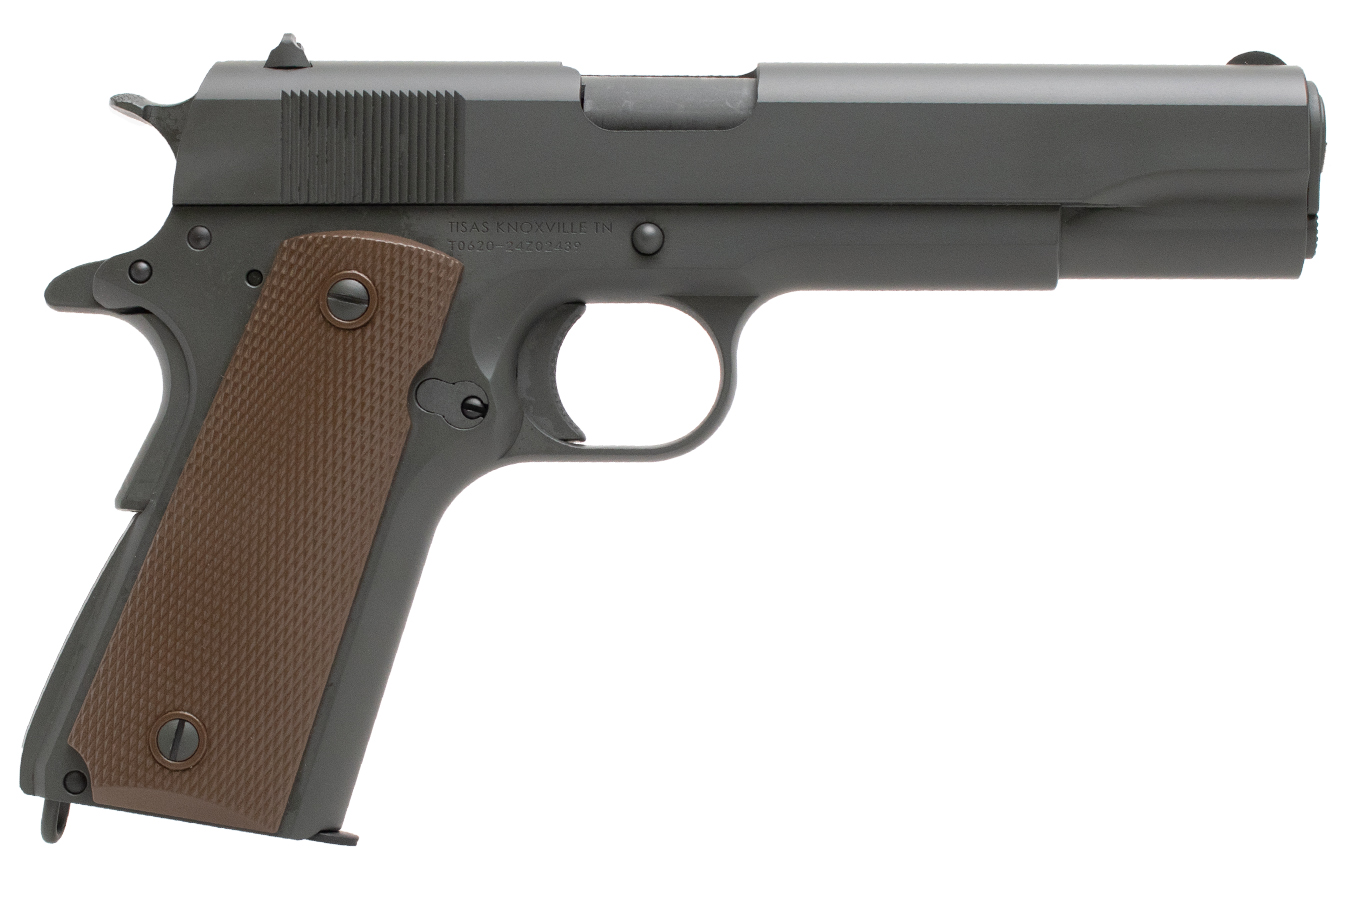 No. 20 Best Selling: TISAS 1911 A1 45 ACP 5 IN BBL GRAY CERAKOTE 1 MAG